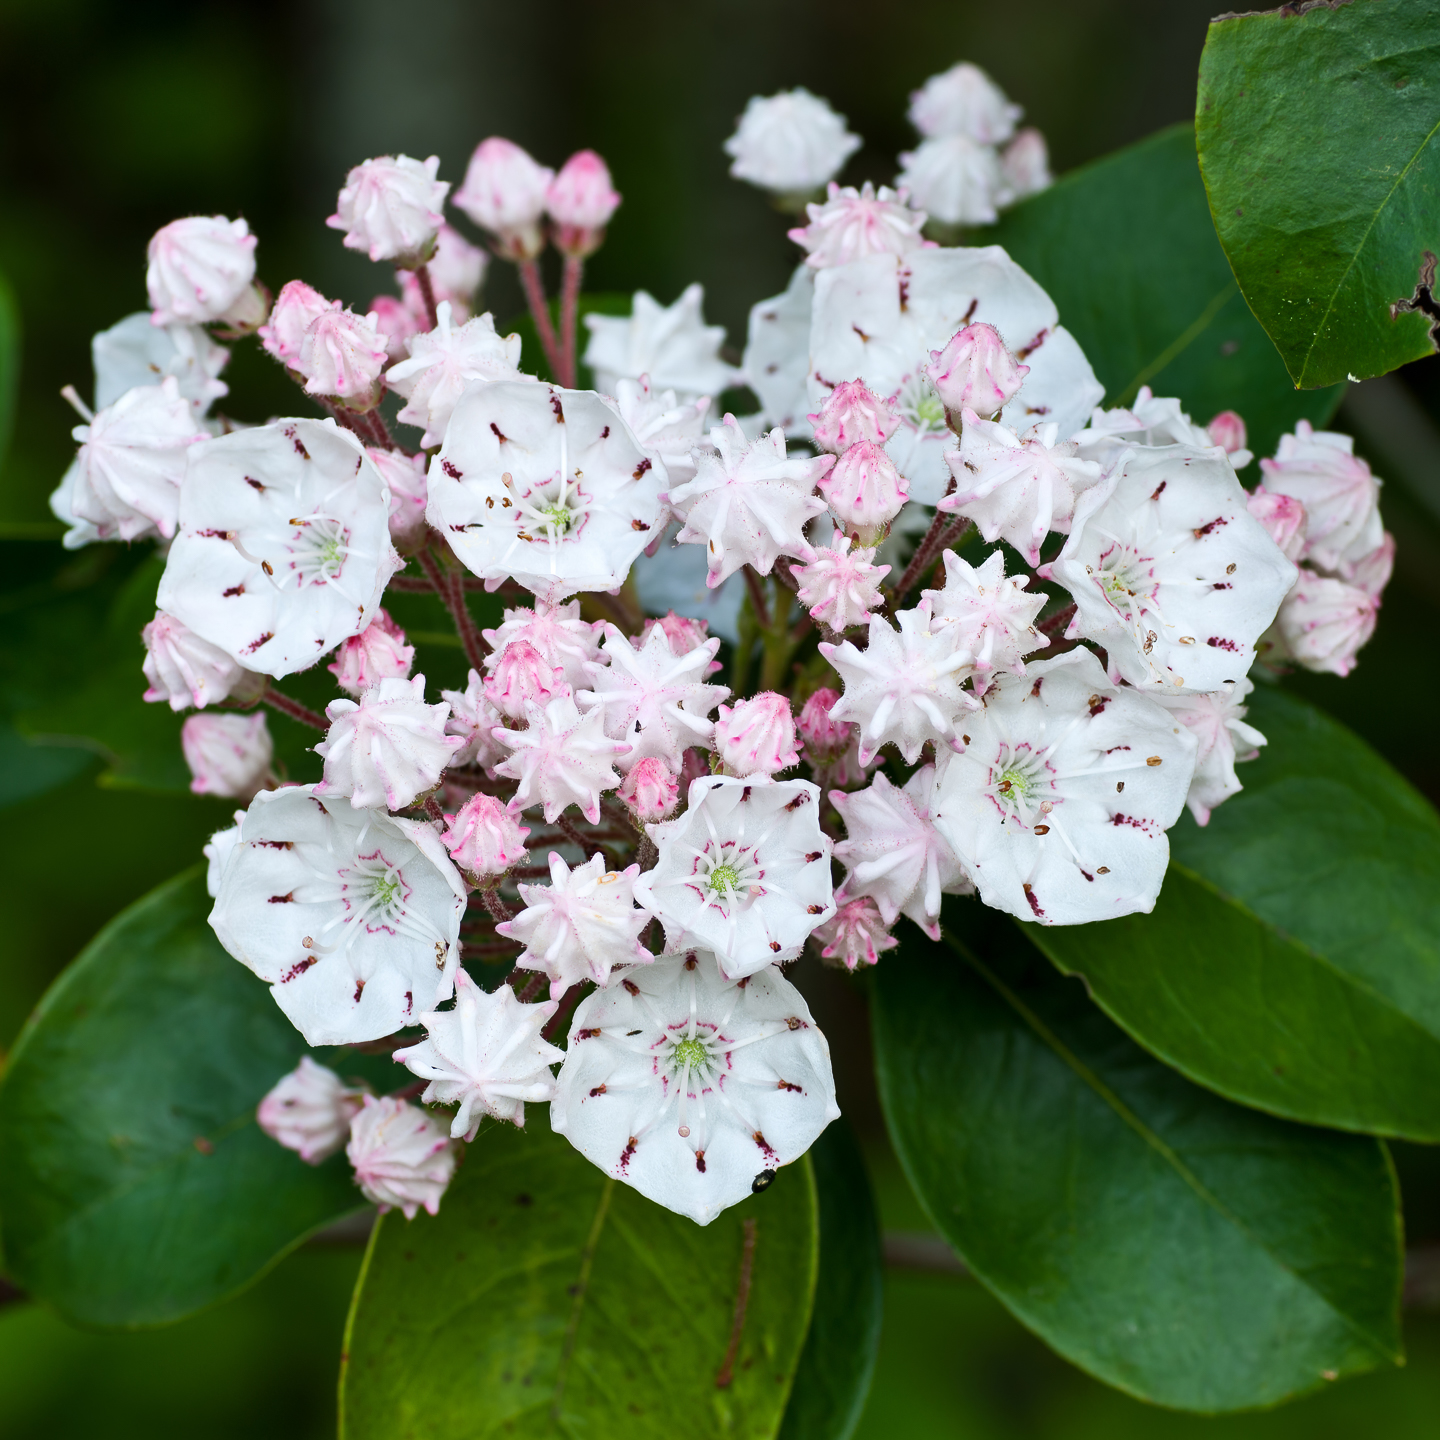 close up of white and pink Mountain Laurel flowers ©Gerry - stock.adobe.com